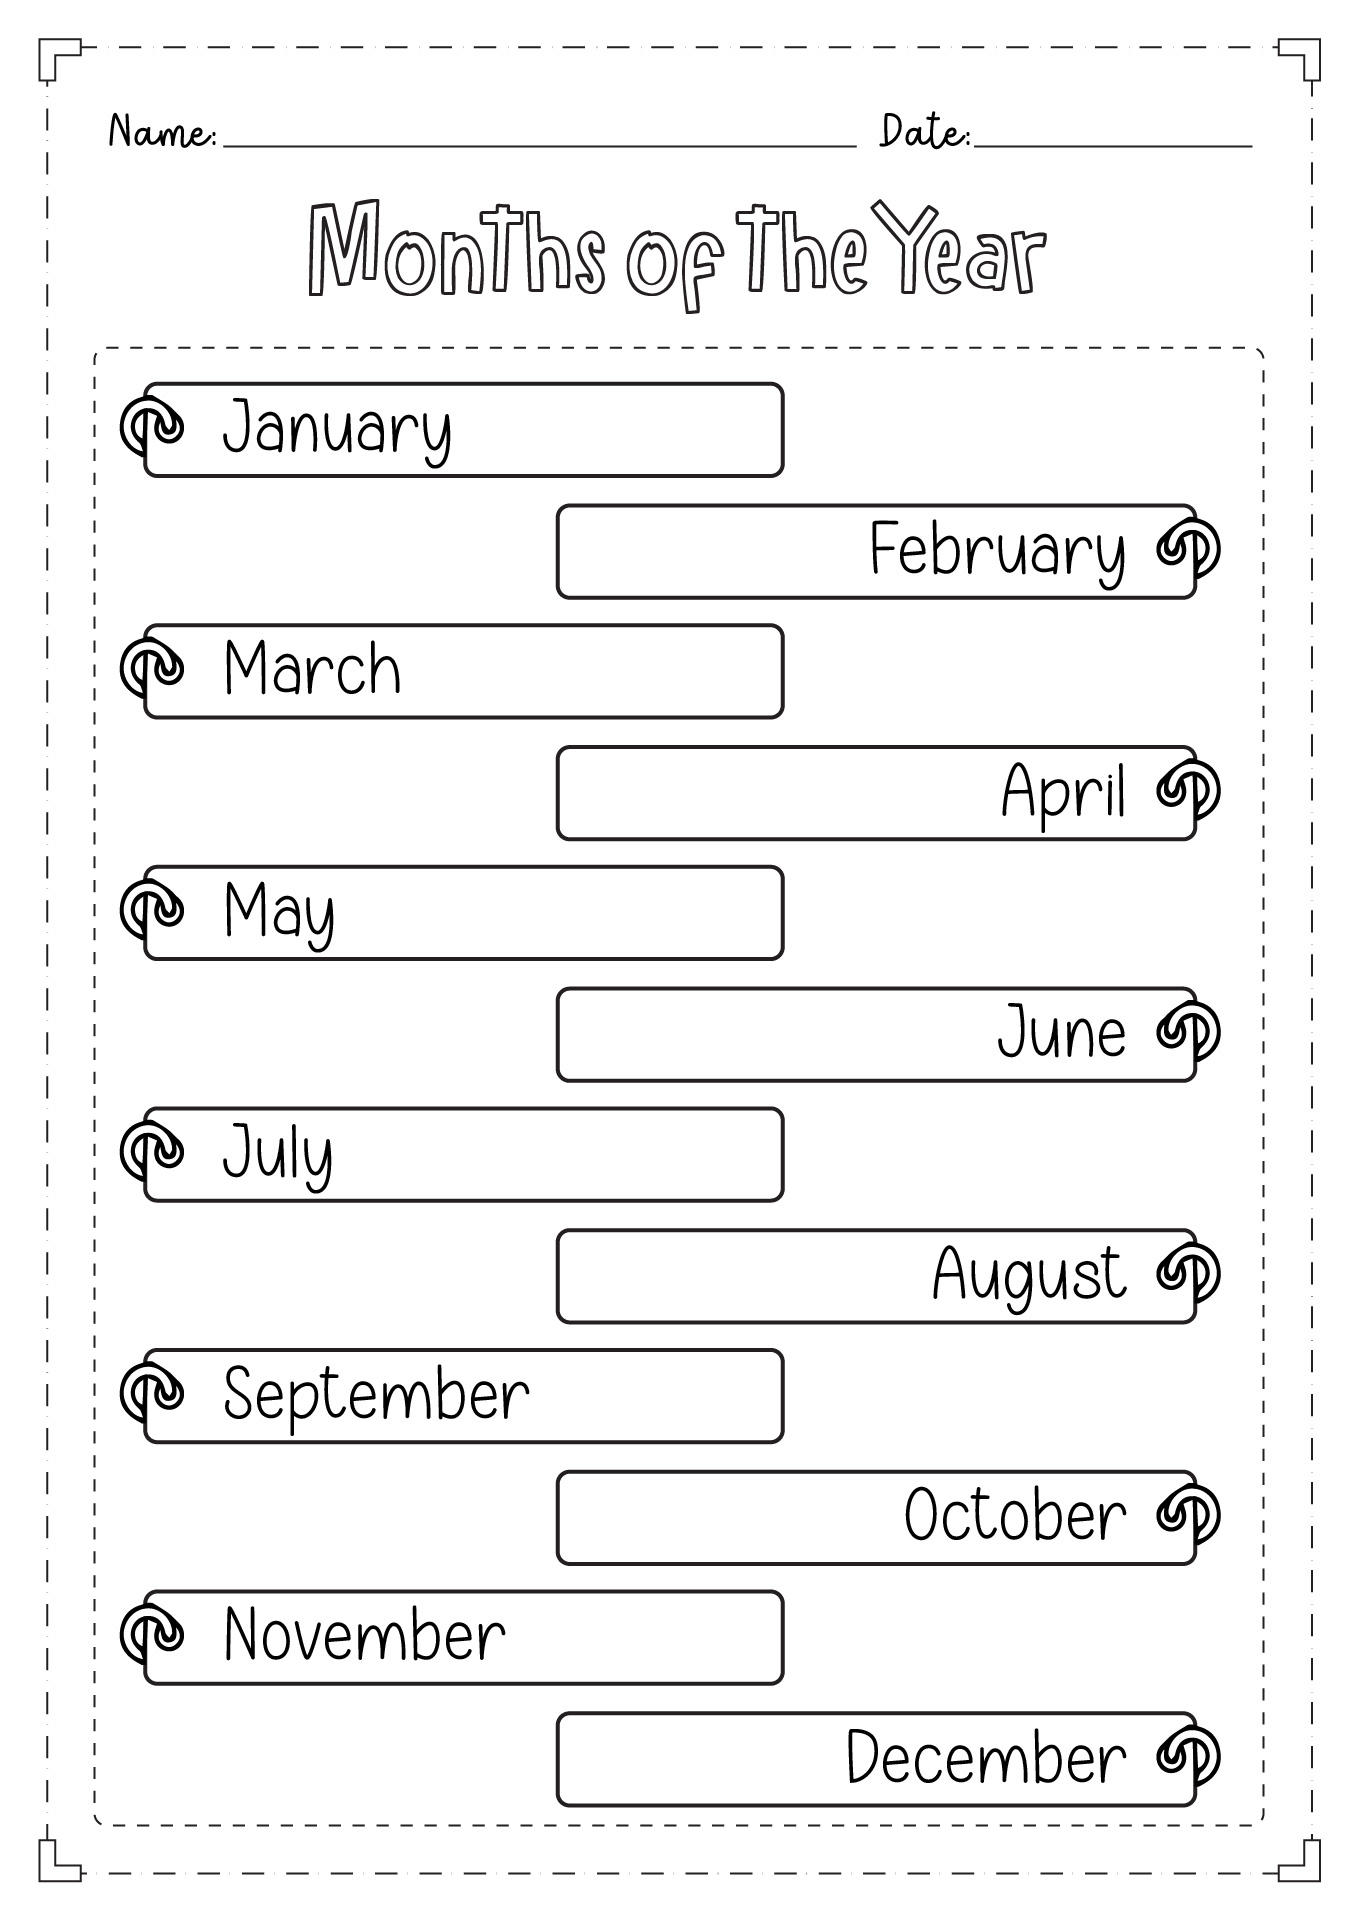 Learning Months of the Year Image